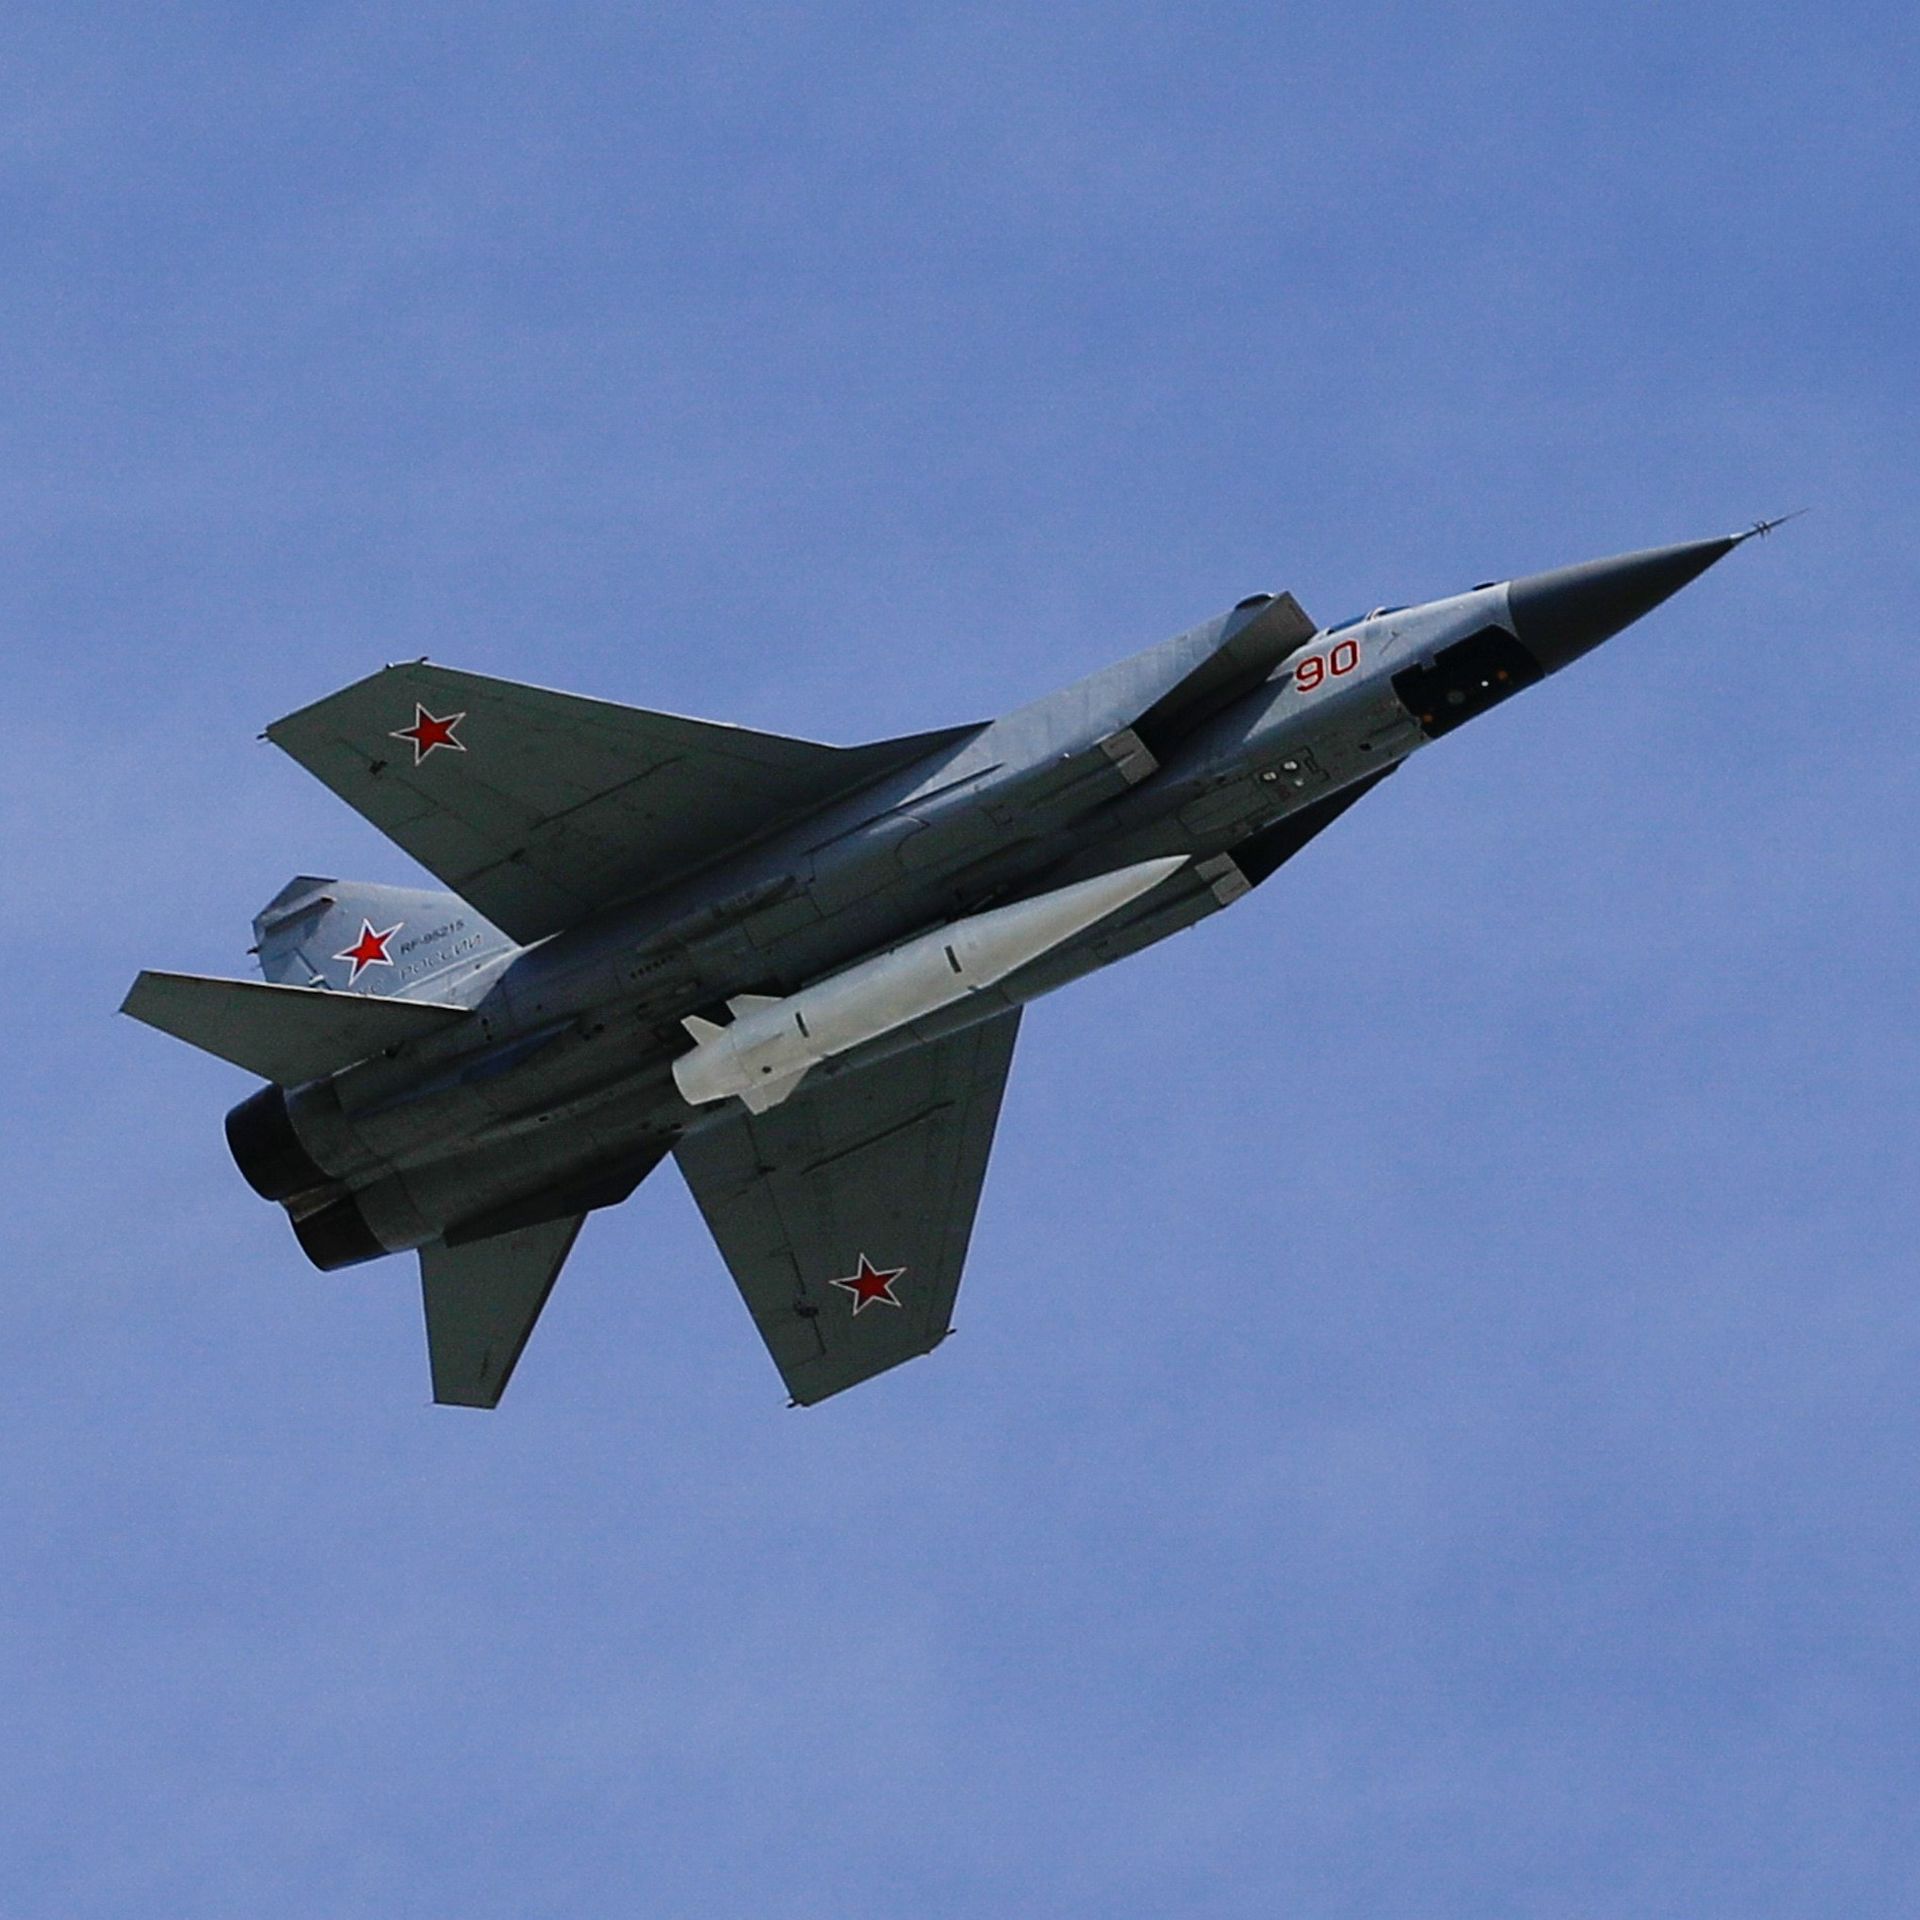 A MiG-31K fighter jet with a Kinzhal hypersonic missile attached.